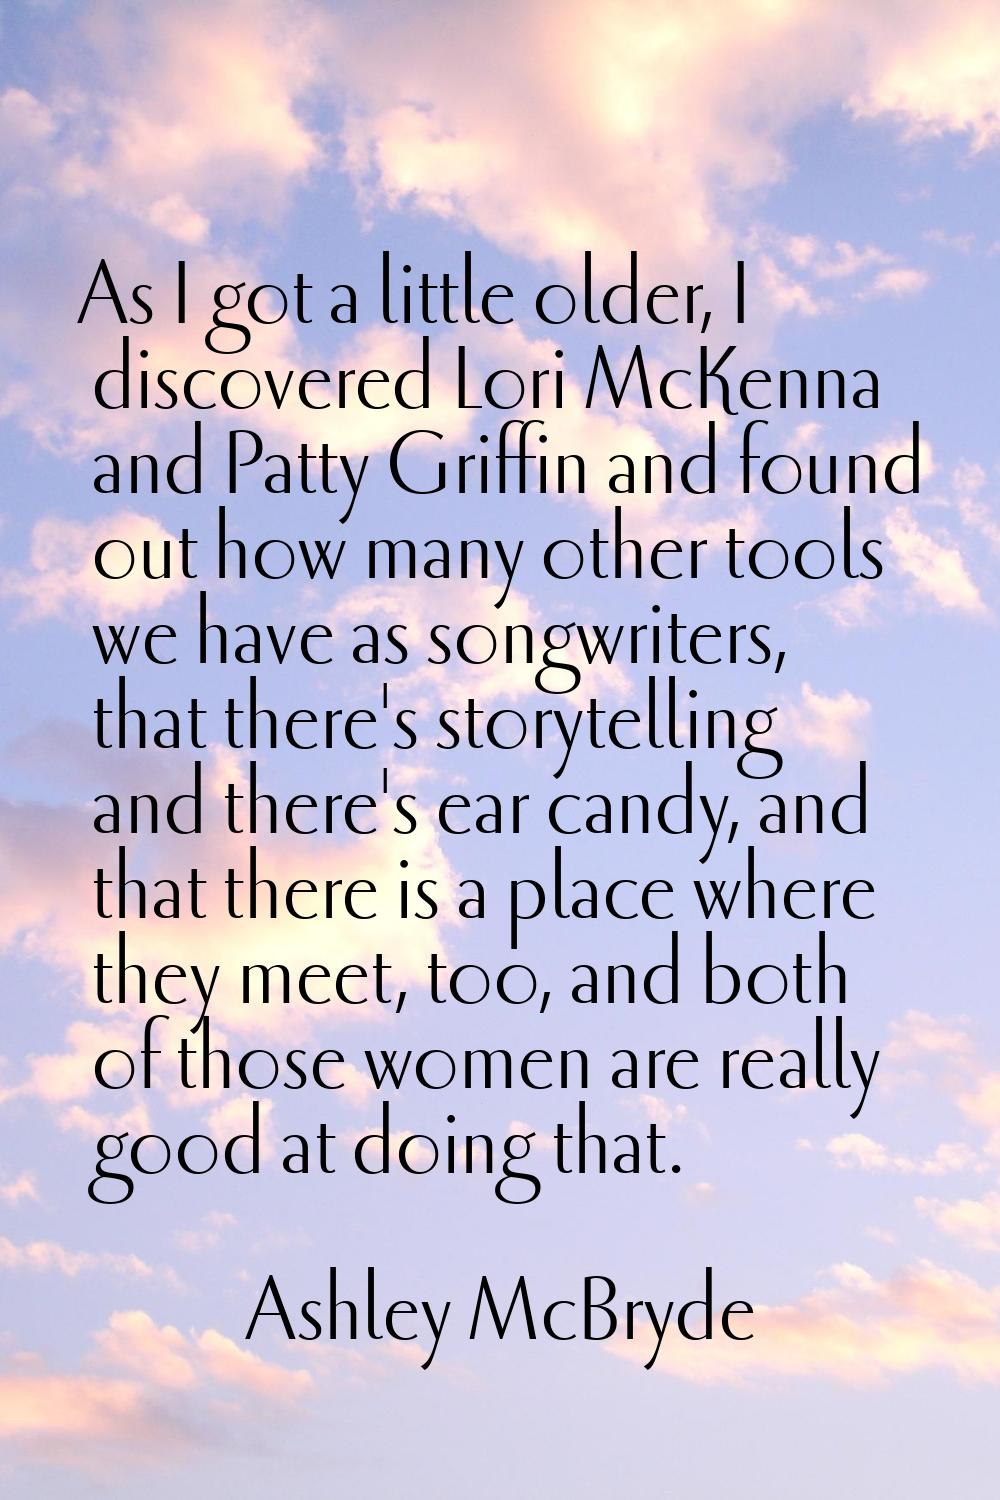 As I got a little older, I discovered Lori McKenna and Patty Griffin and found out how many other t